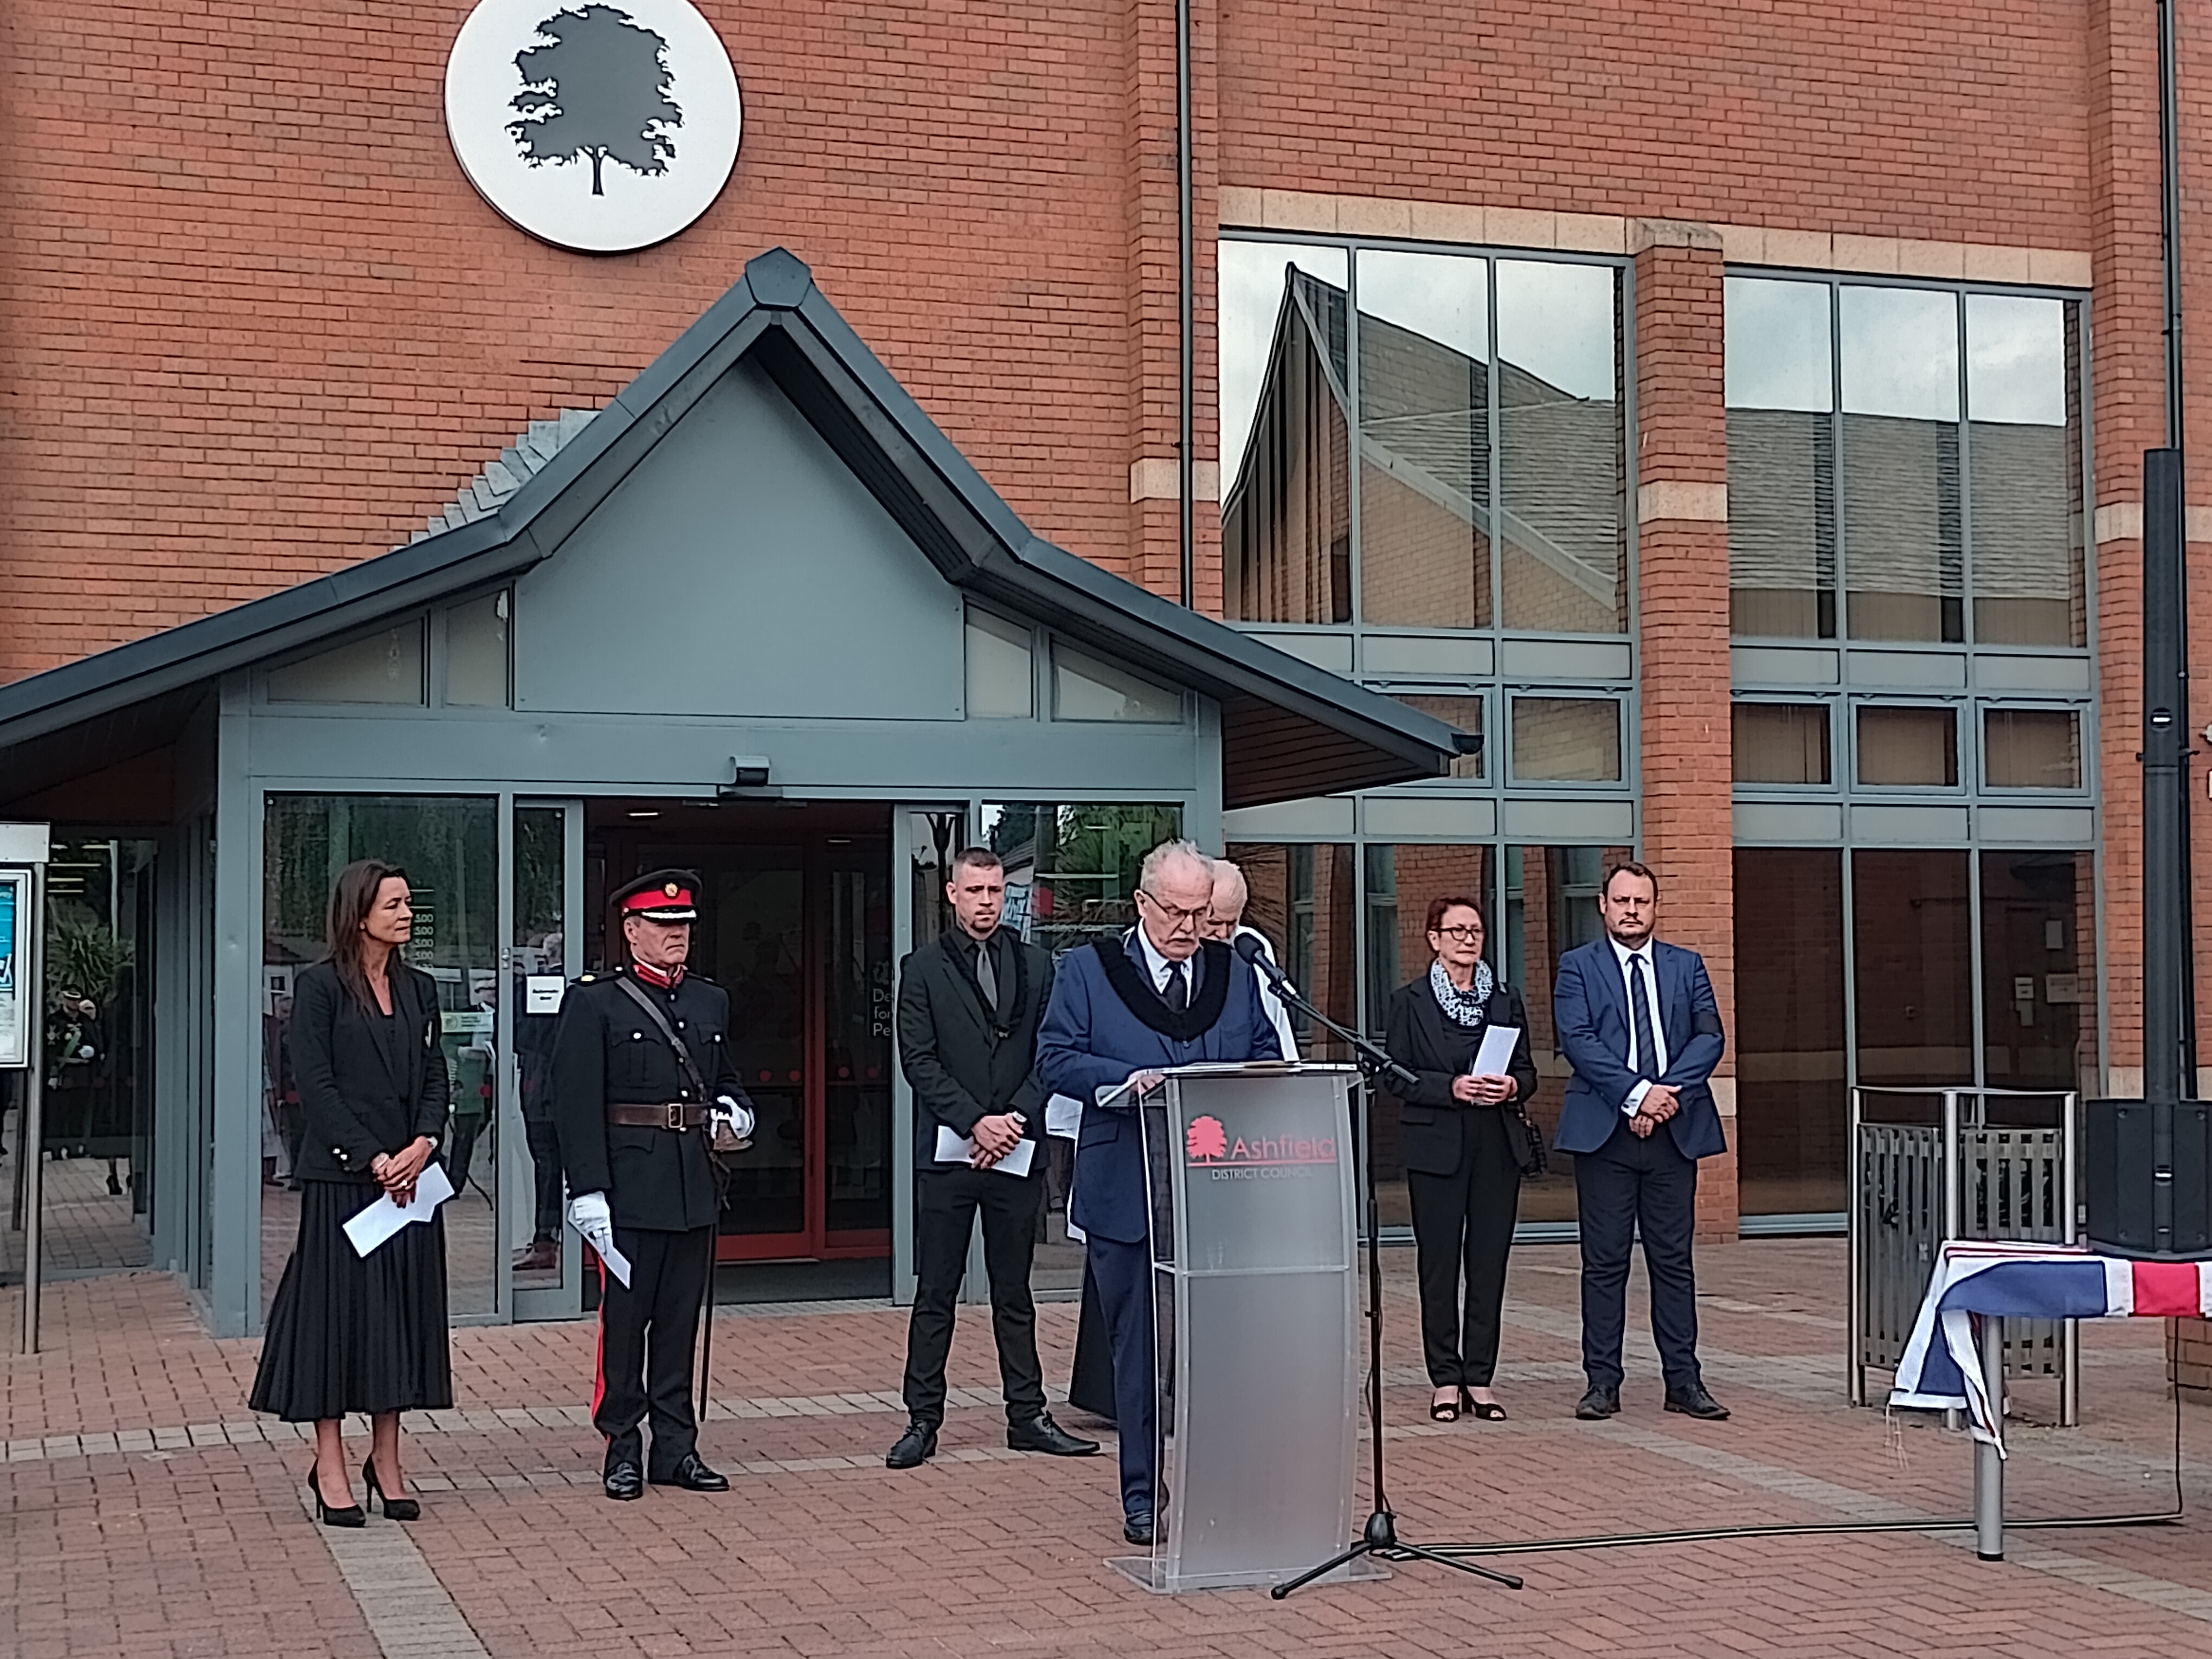 Proclamation Ceremony taking place outside Ashfield District Council Offices